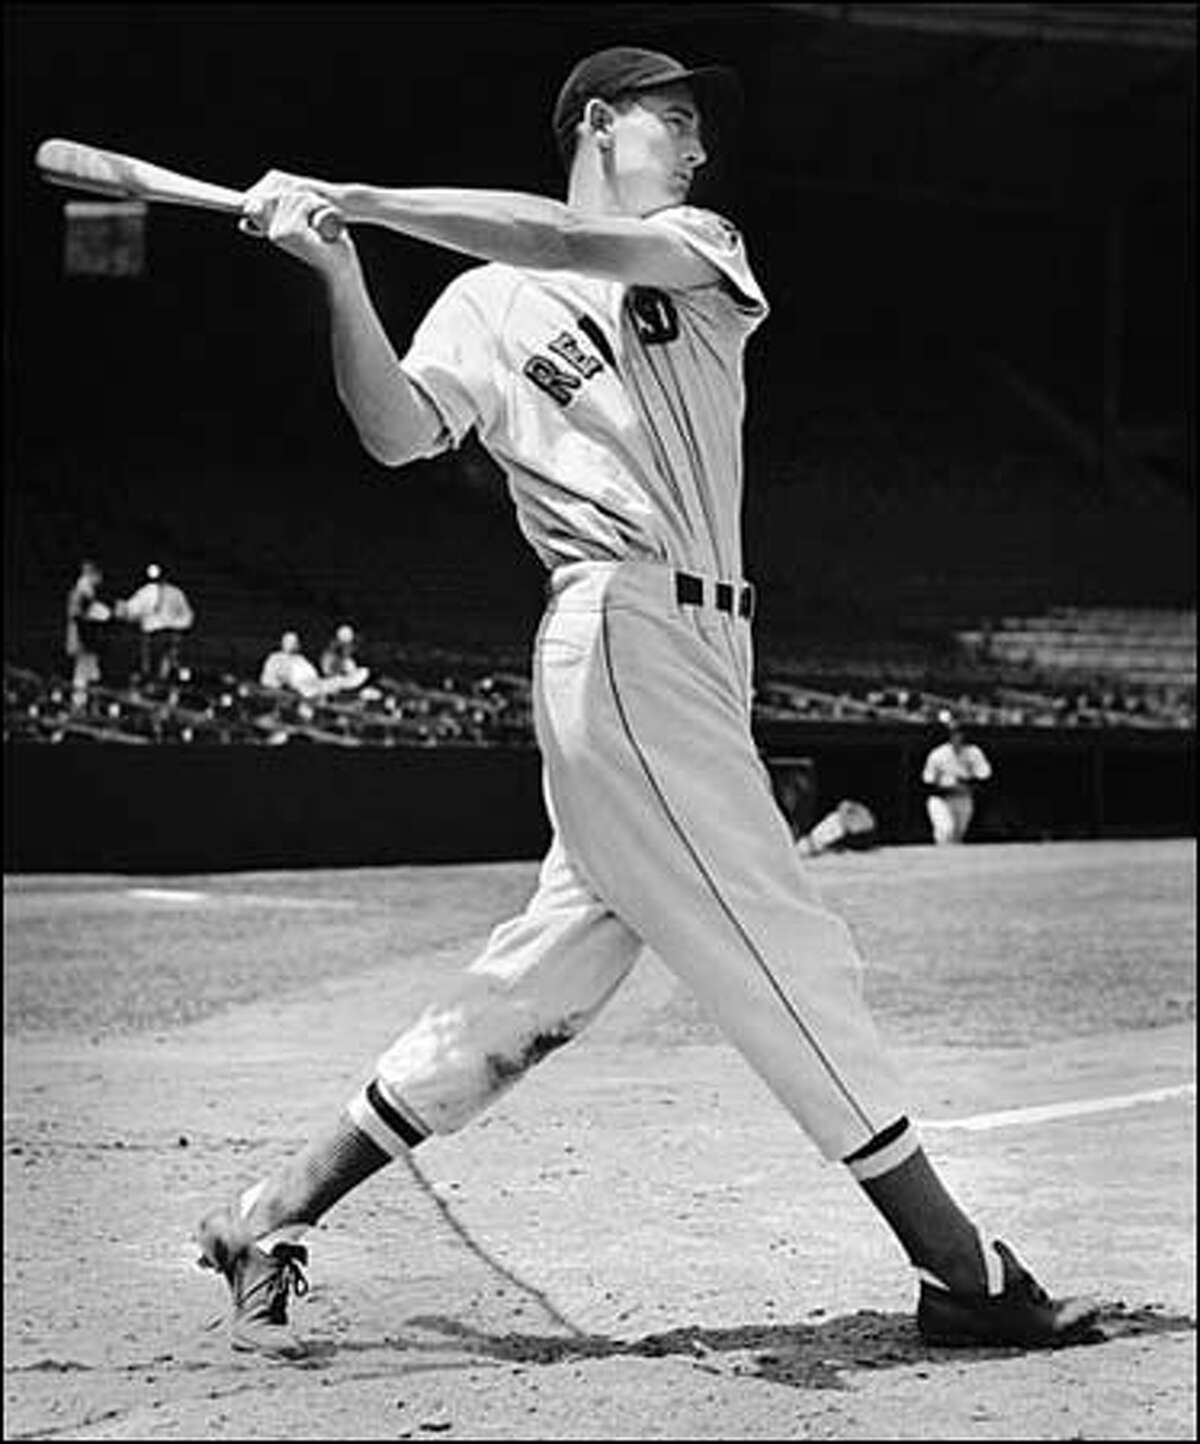 Ted Williams is at bat in this June 15, 1939, photo at Fenway Park in Boston.